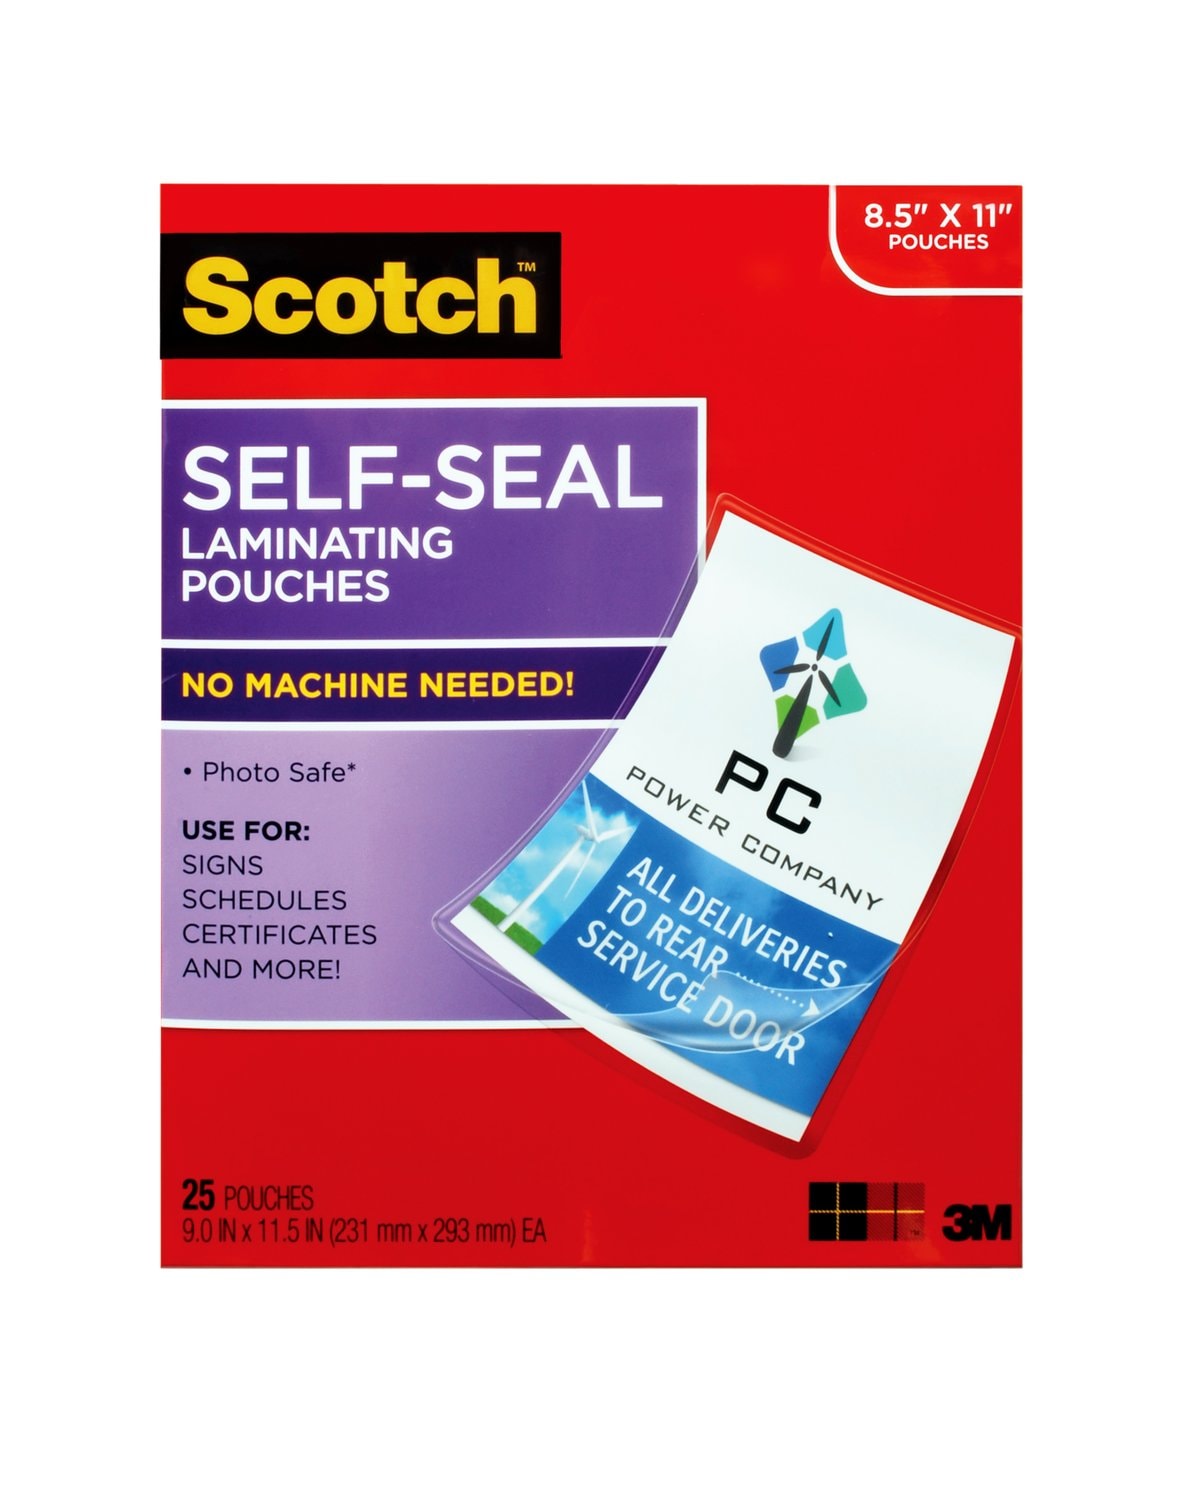 7010311316 - Scotch Self-Laminating Document Pouches LS854WC, 9-1/16 in x 11.5 in
(231 mm x 293 mm)